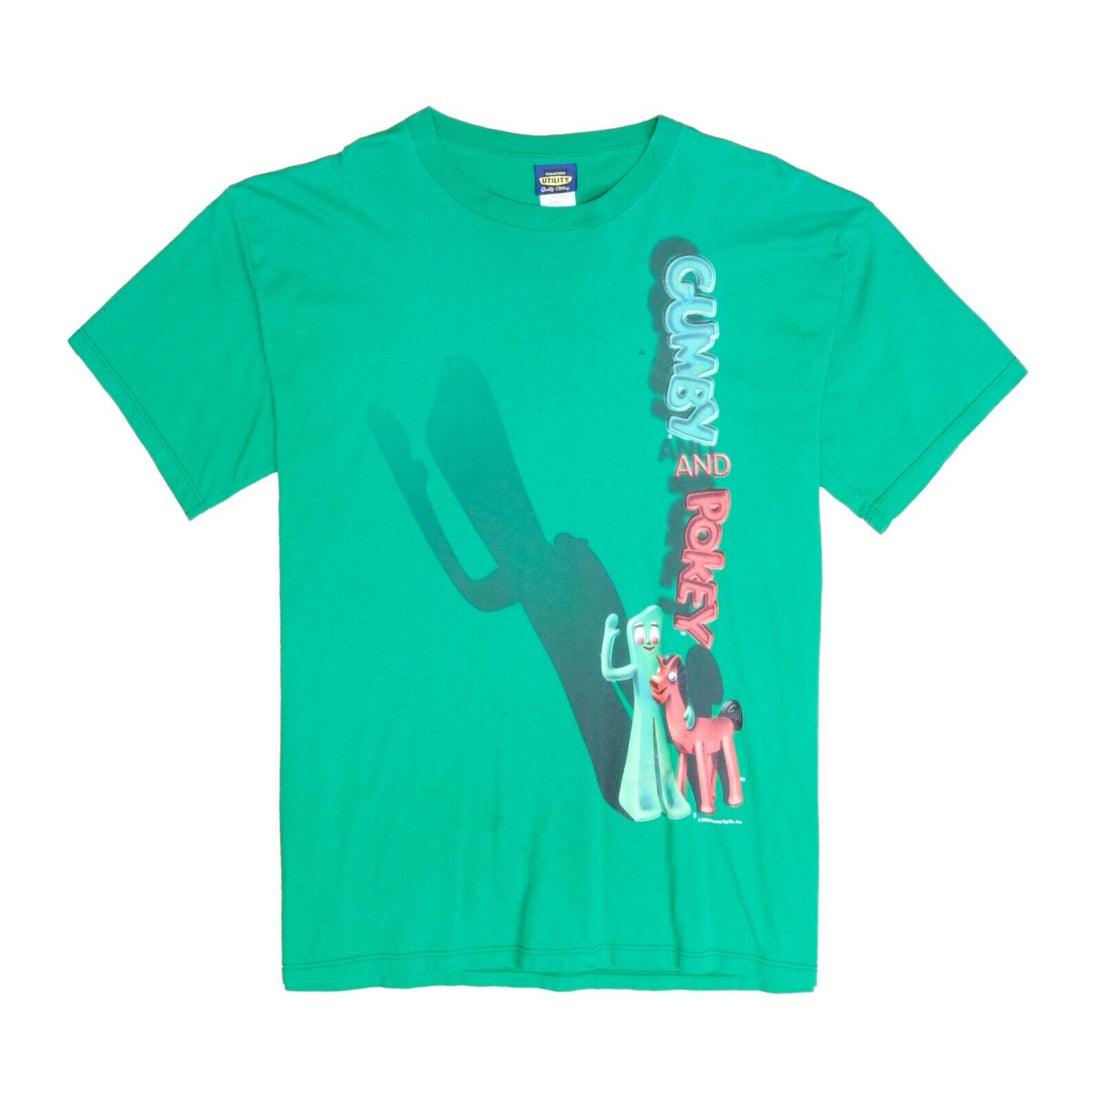 Vintage Gumby and Pokey T-Shirt Size Large Cartoon Promo 1996 90s